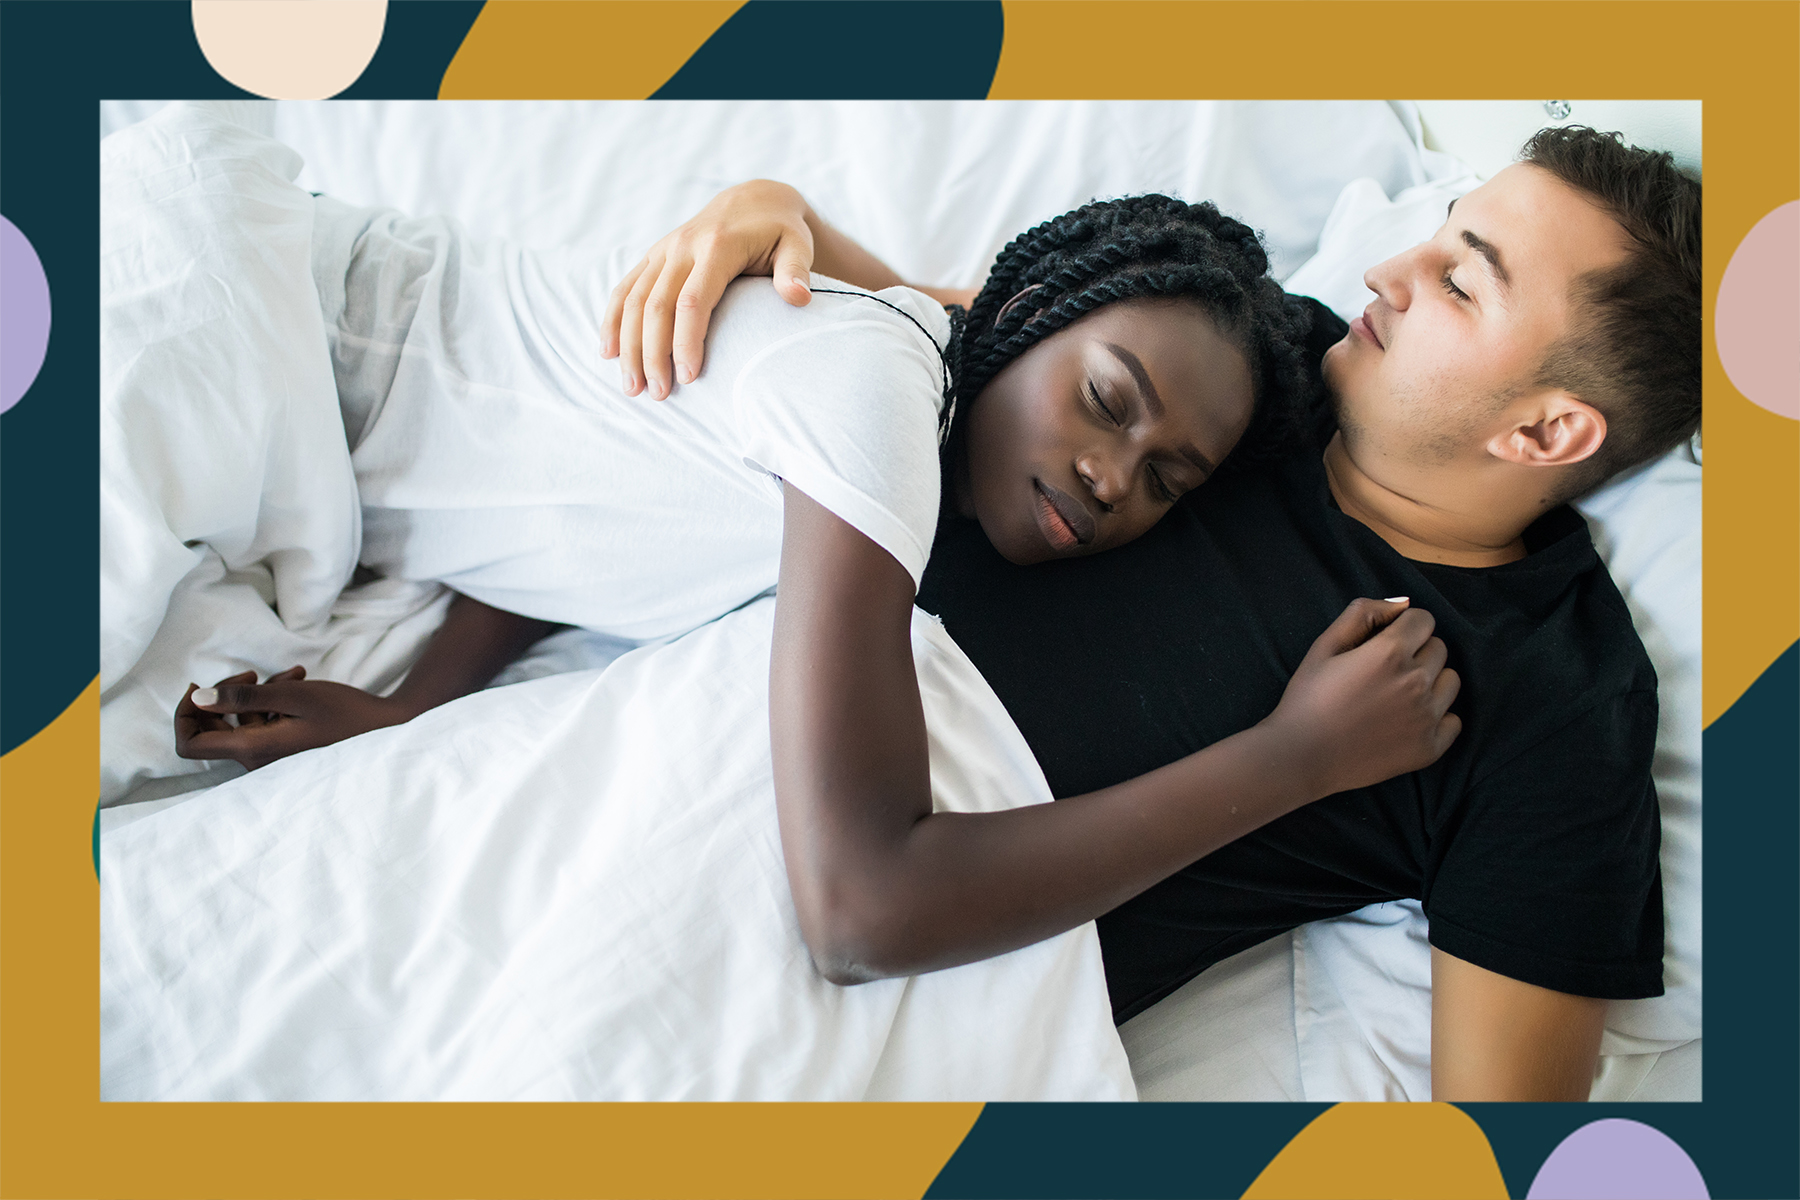 What Dreams About Cheating Actually Mean, According to ExpertsHelloGiggles